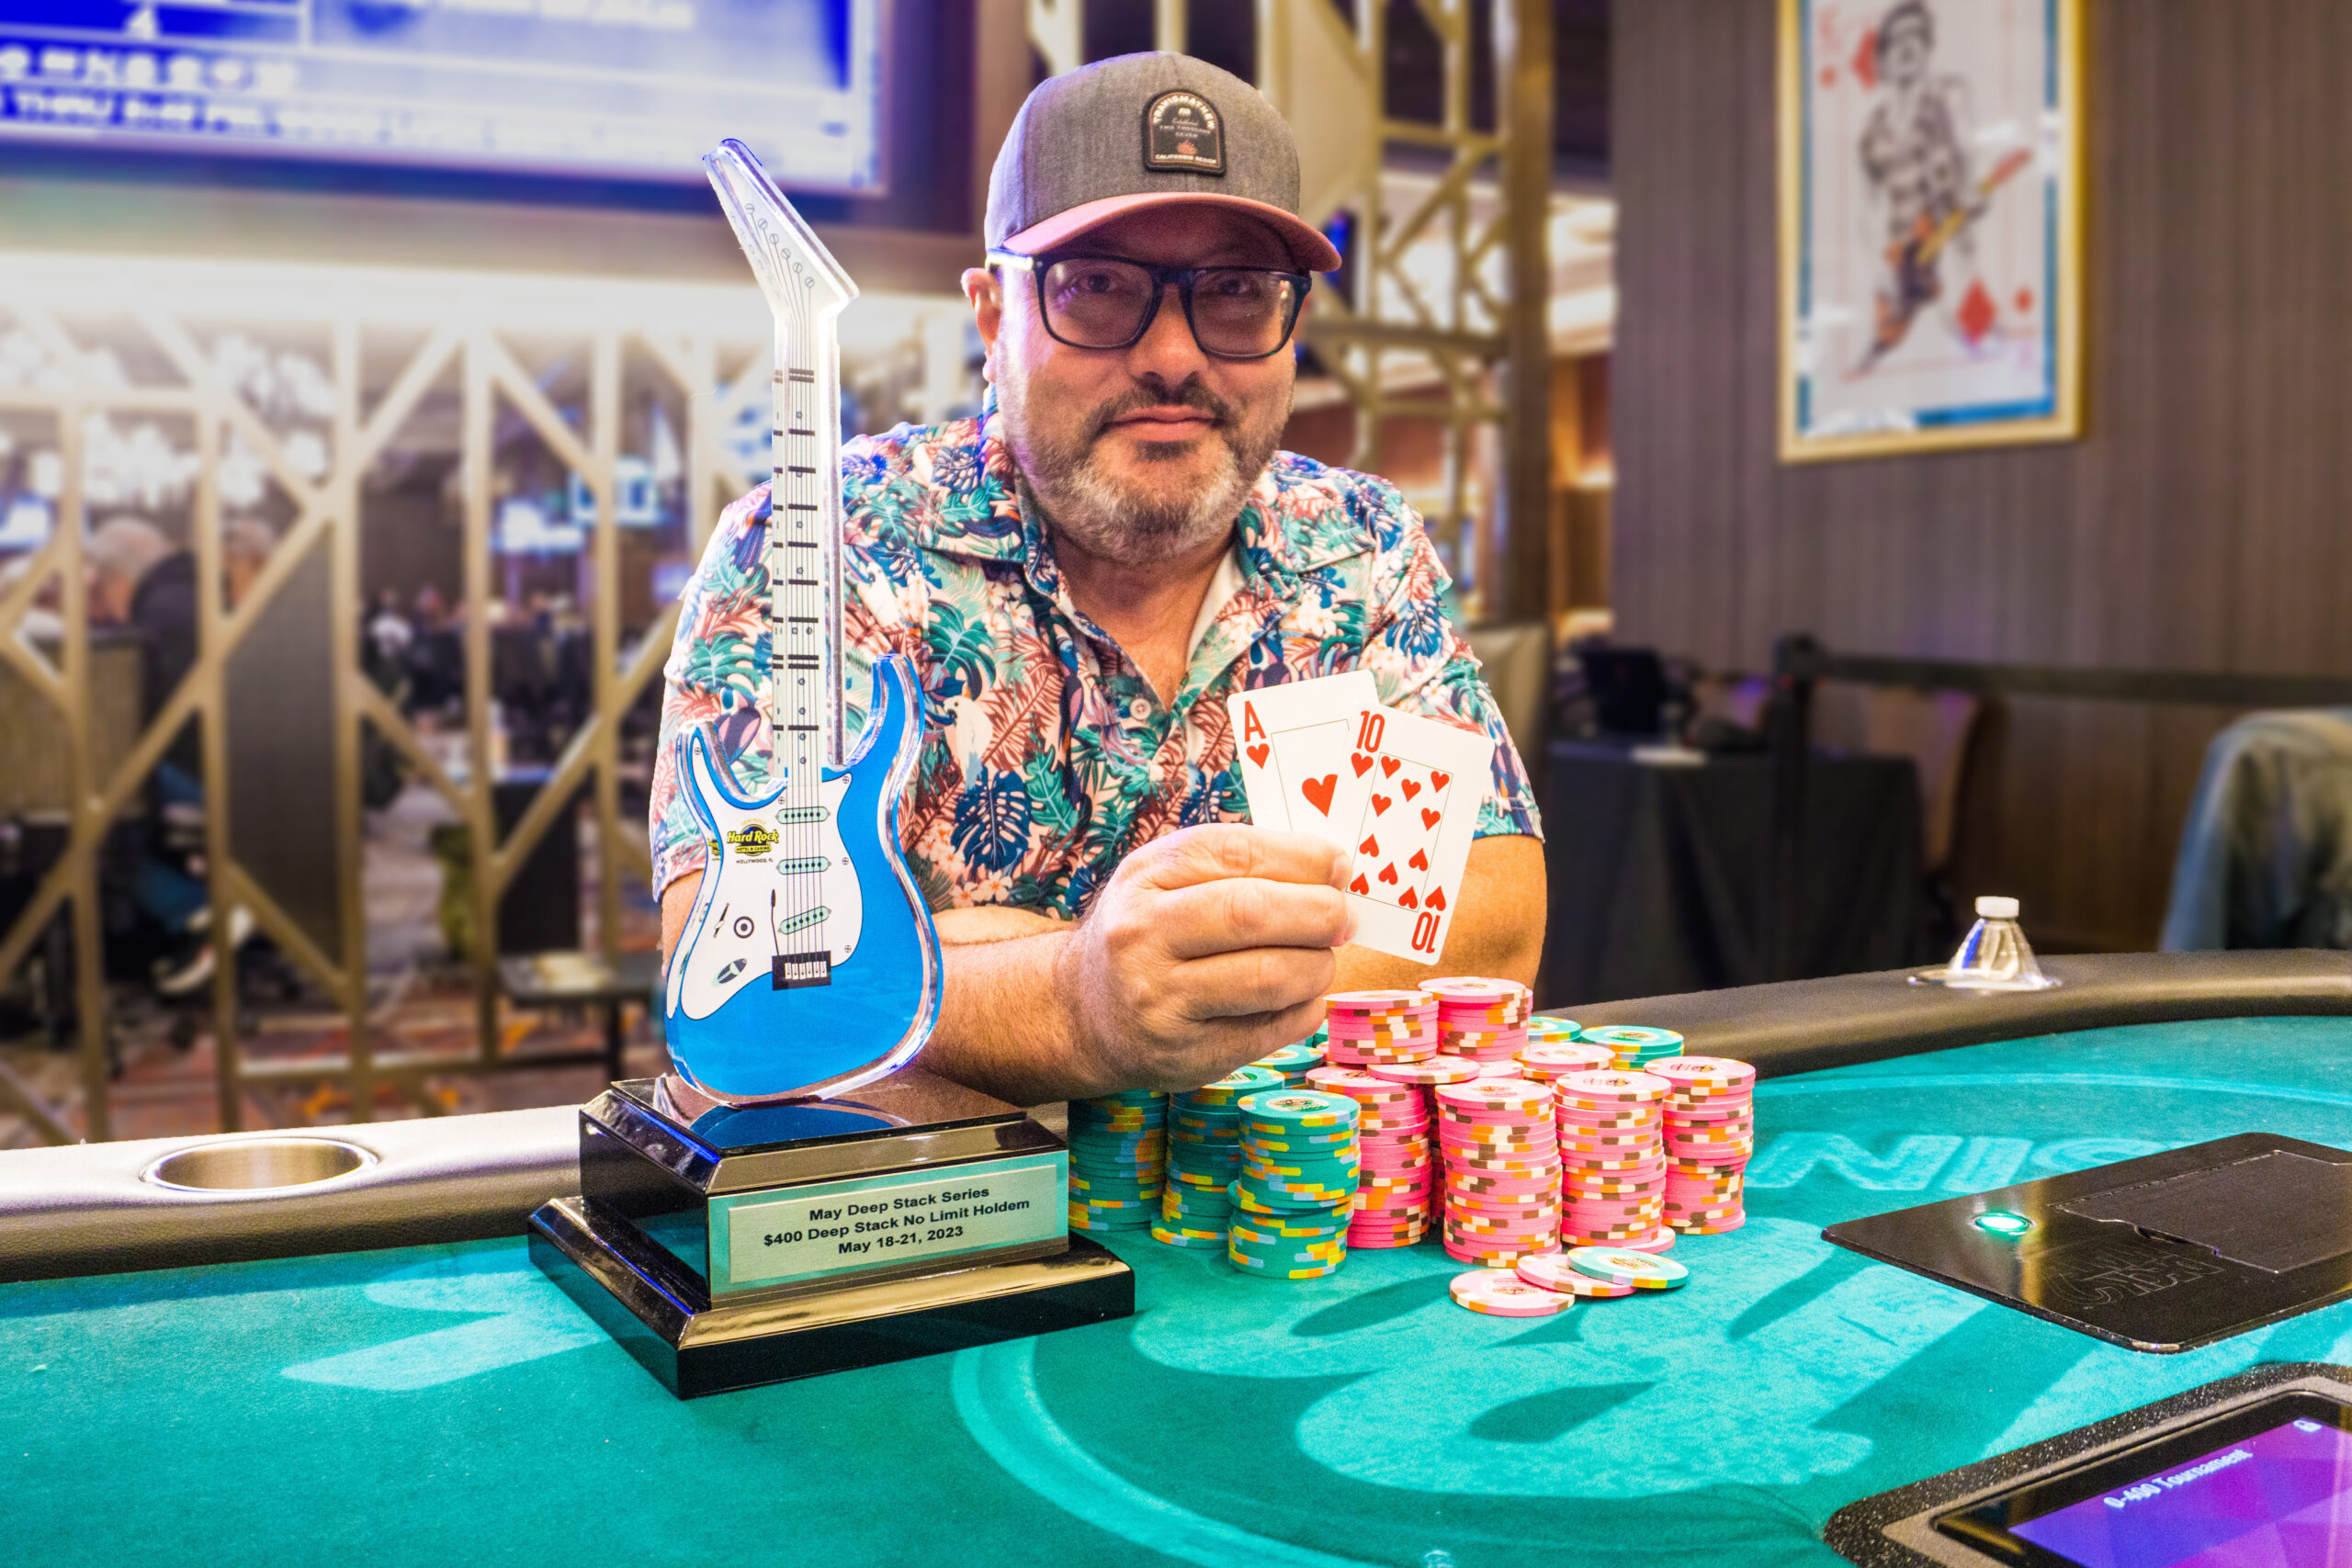 Carlos Bermudez Wins Second DSPS Title in Four-Way Deal